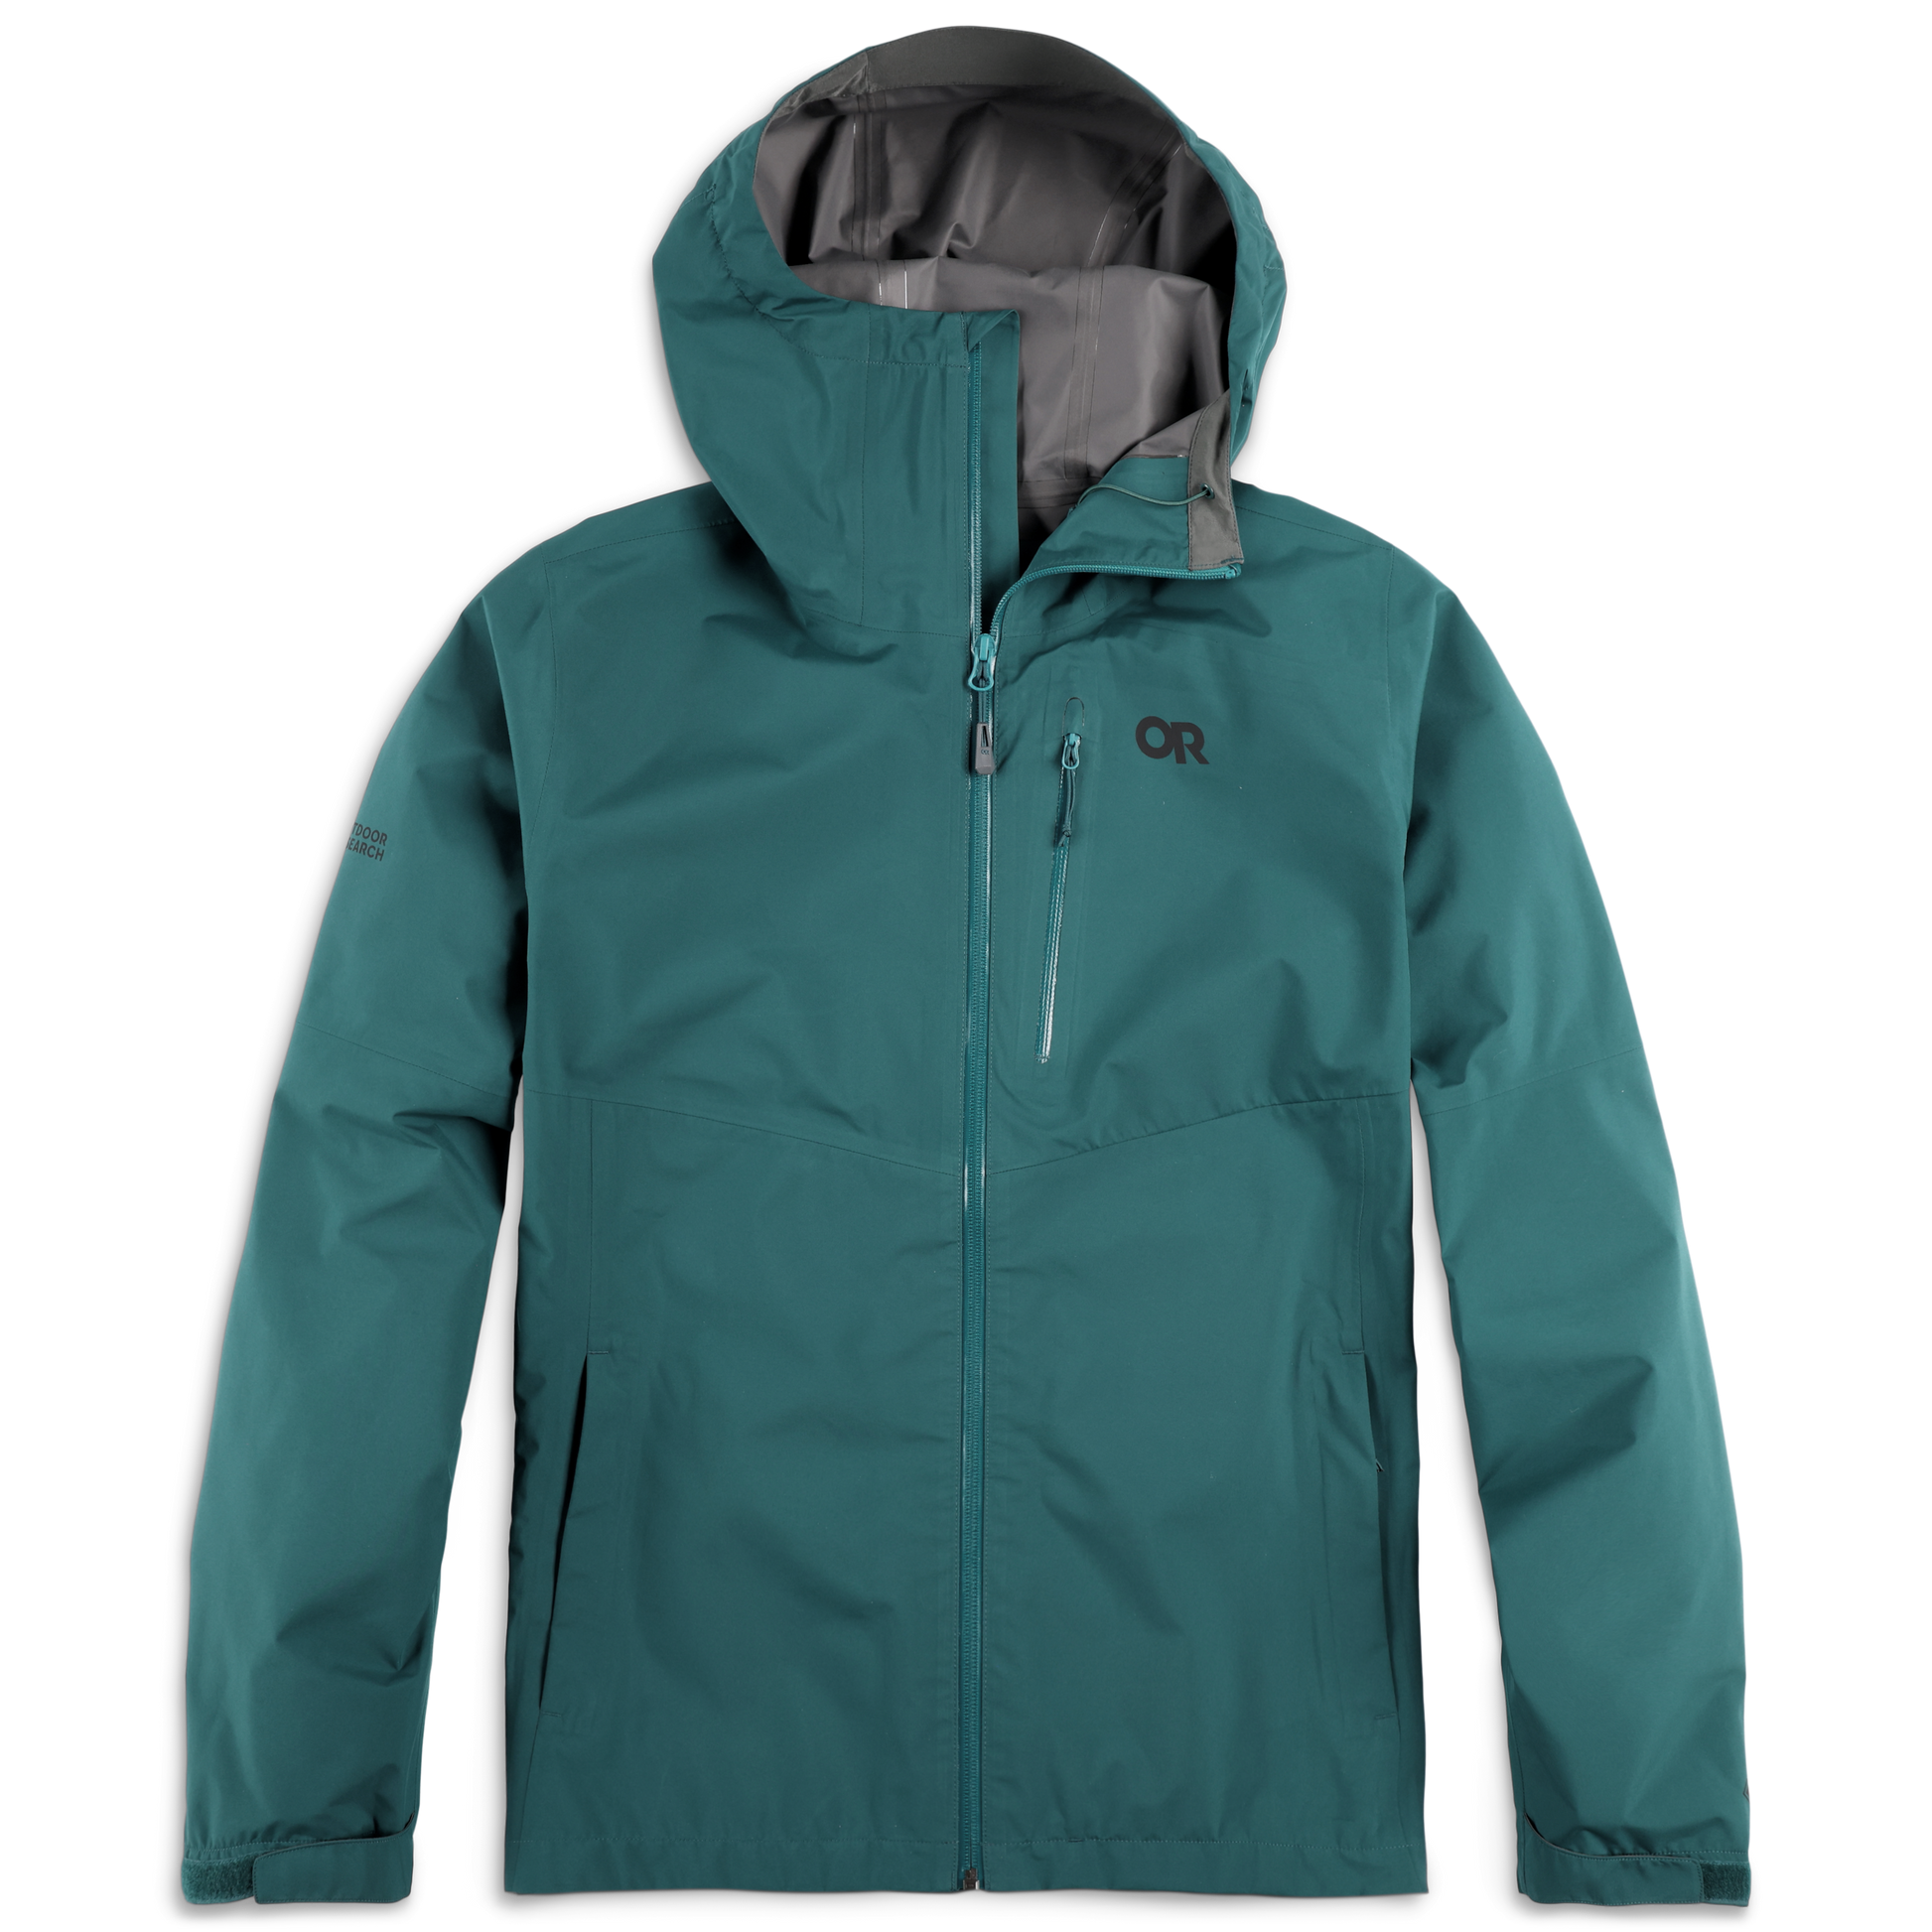 Outdoor Research Foray Rain Jacket